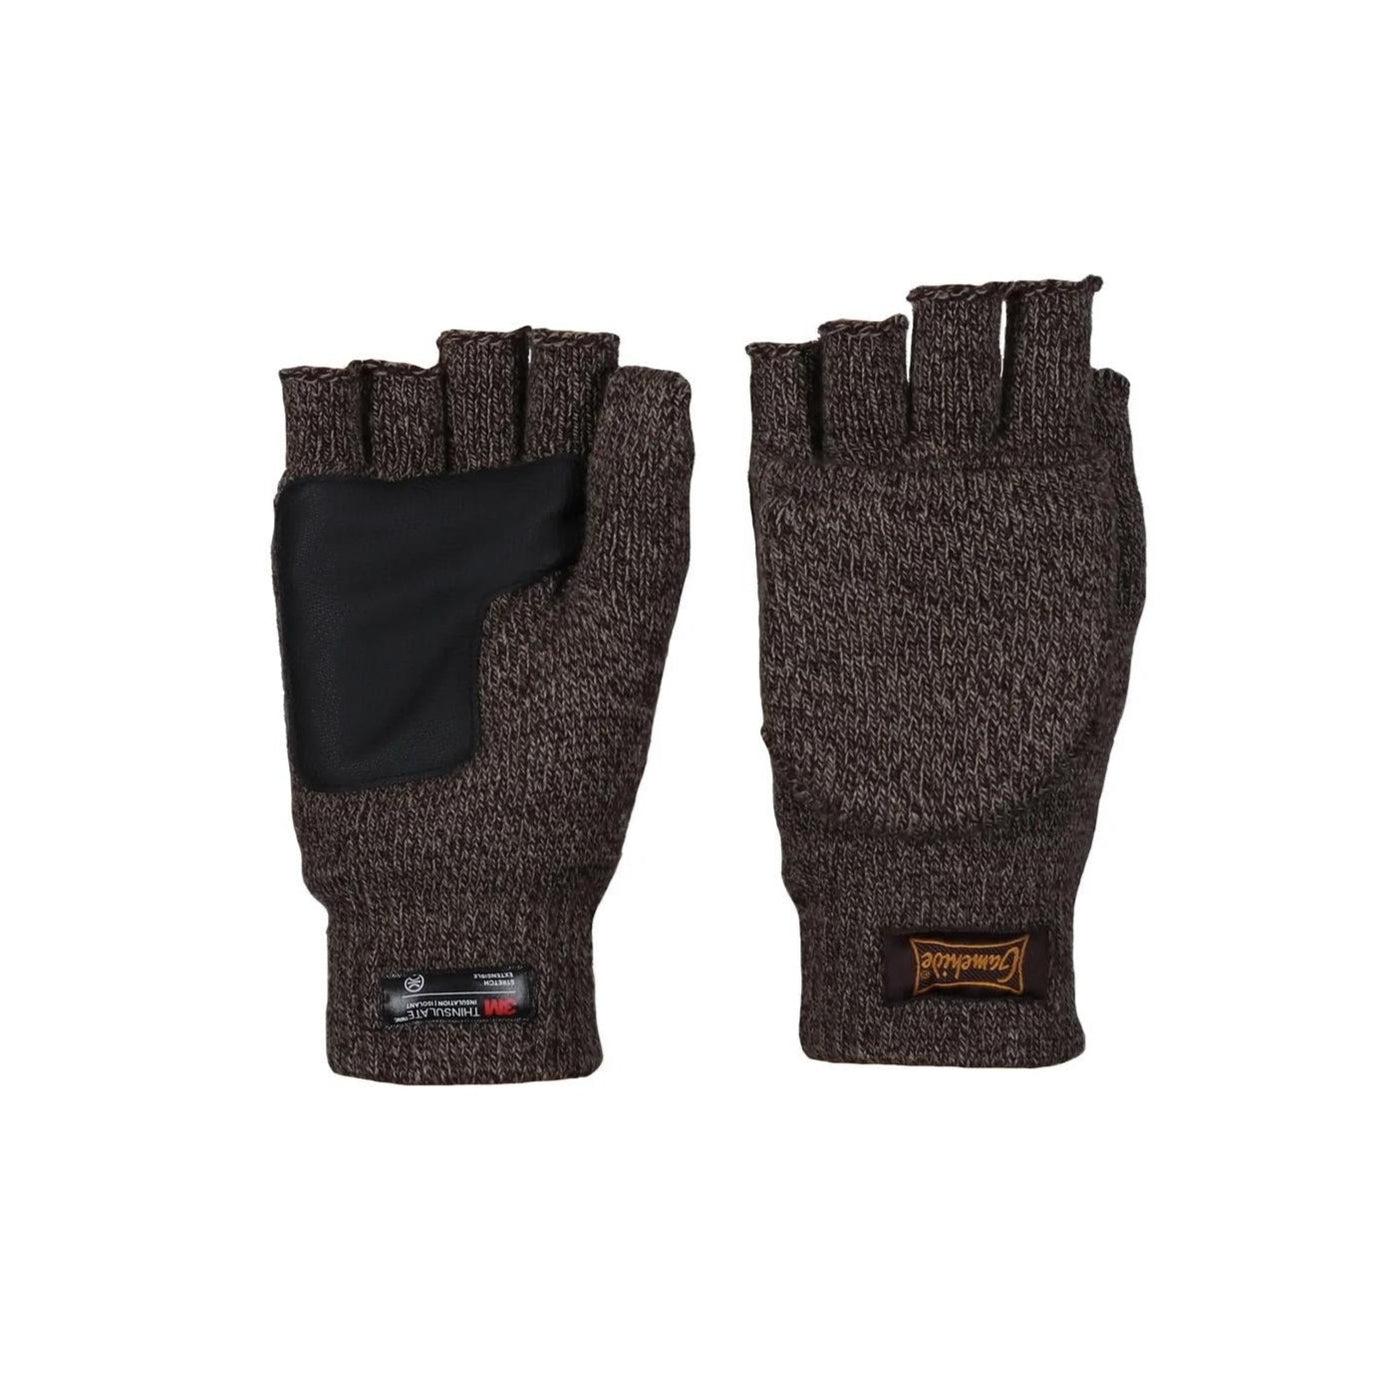 Gamehide Youth Shooting Glove-Hunting/Outdoors-Brown Camo-Kevin's Fine Outdoor Gear & Apparel